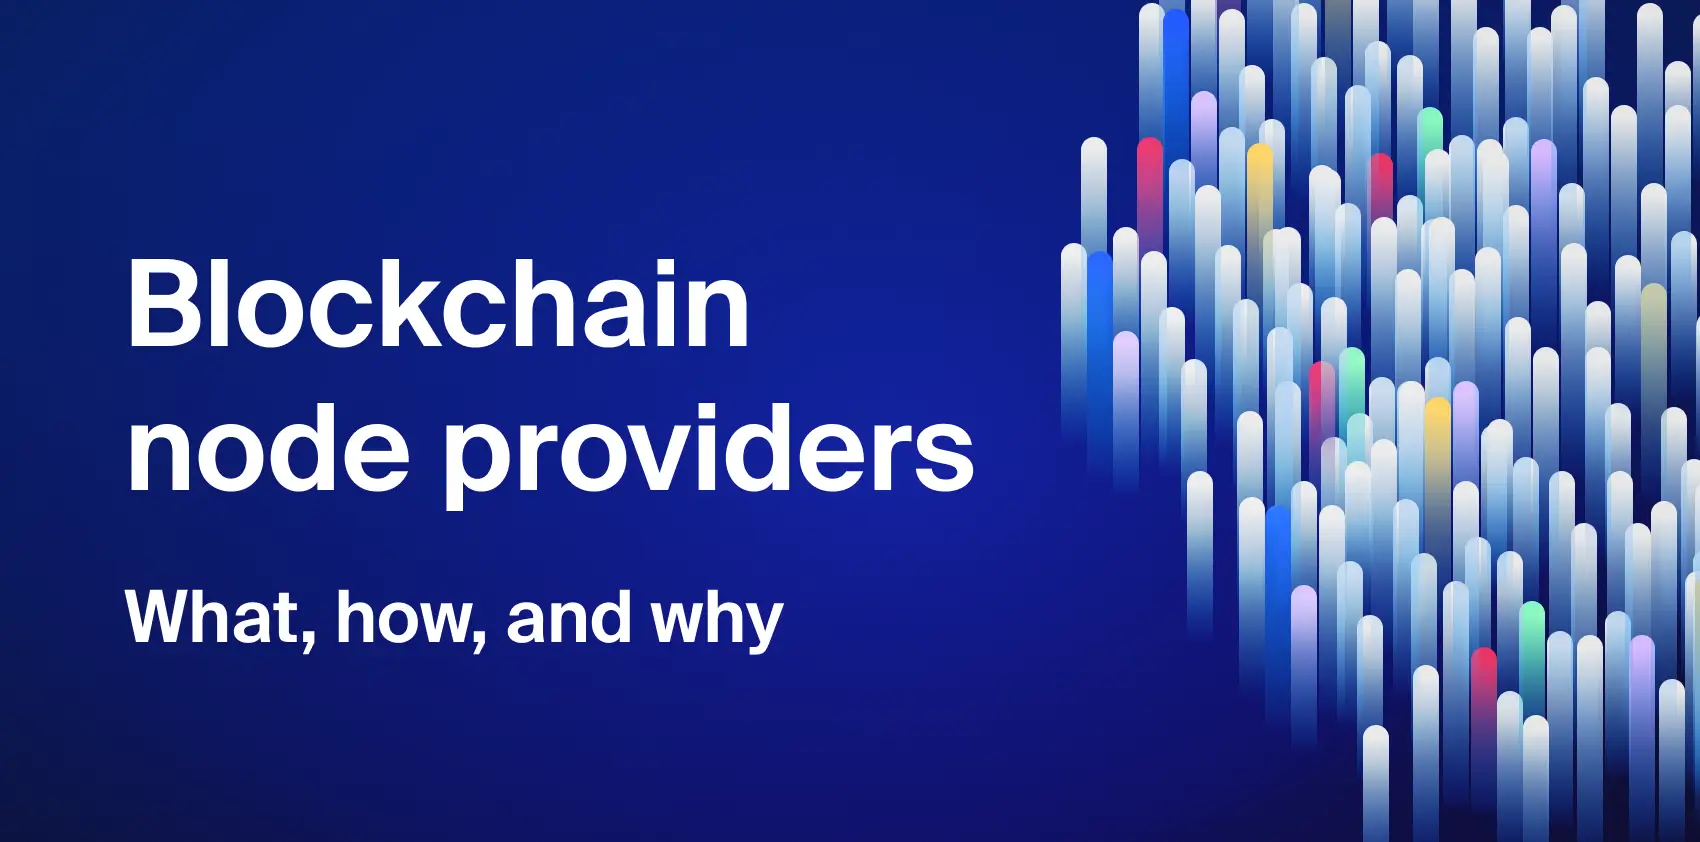 Blockchain node providers: What, how, and why